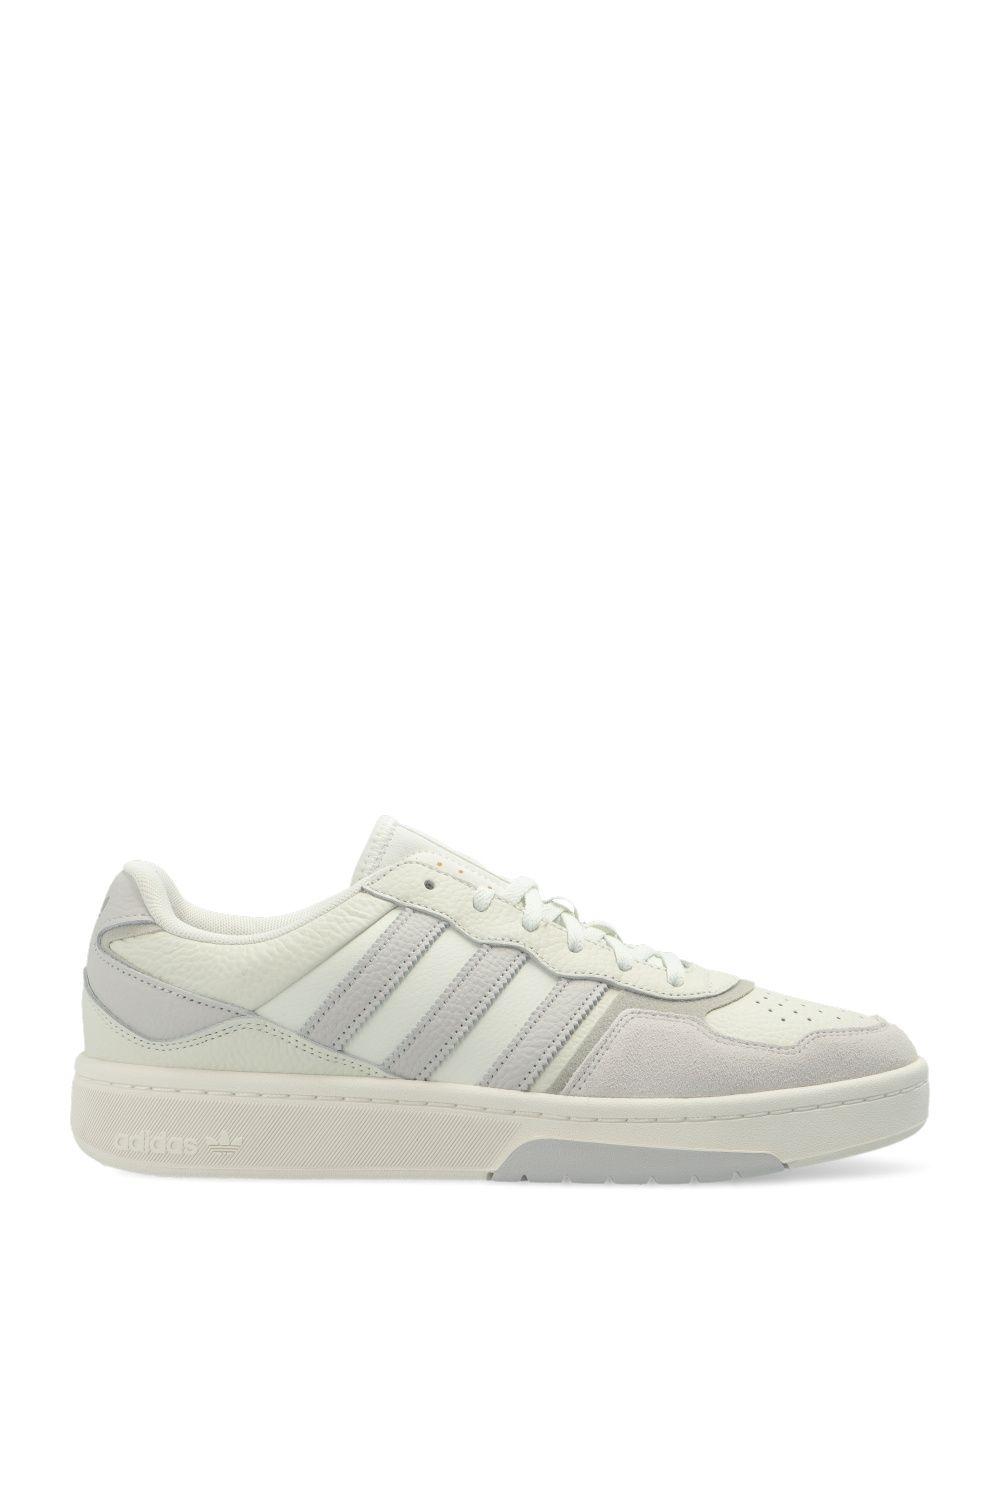 adidas Originals 'courtic' Sneakers in Gray | Lyst